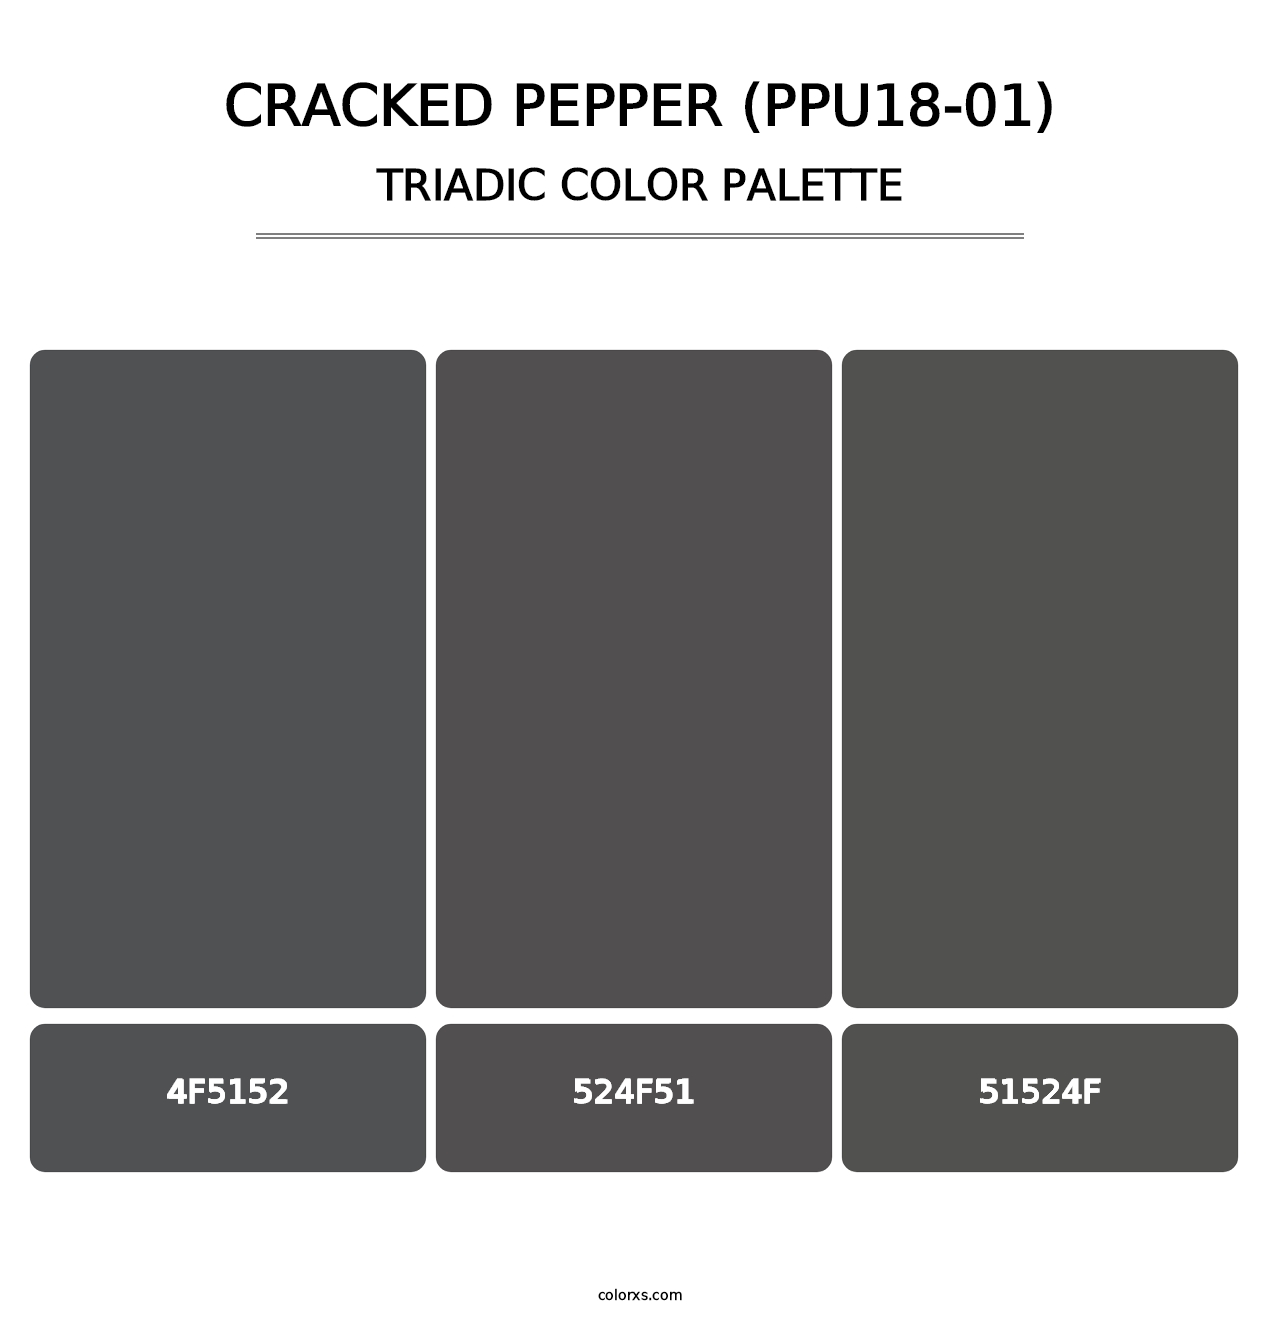 Cracked Pepper (PPU18-01) - Triadic Color Palette